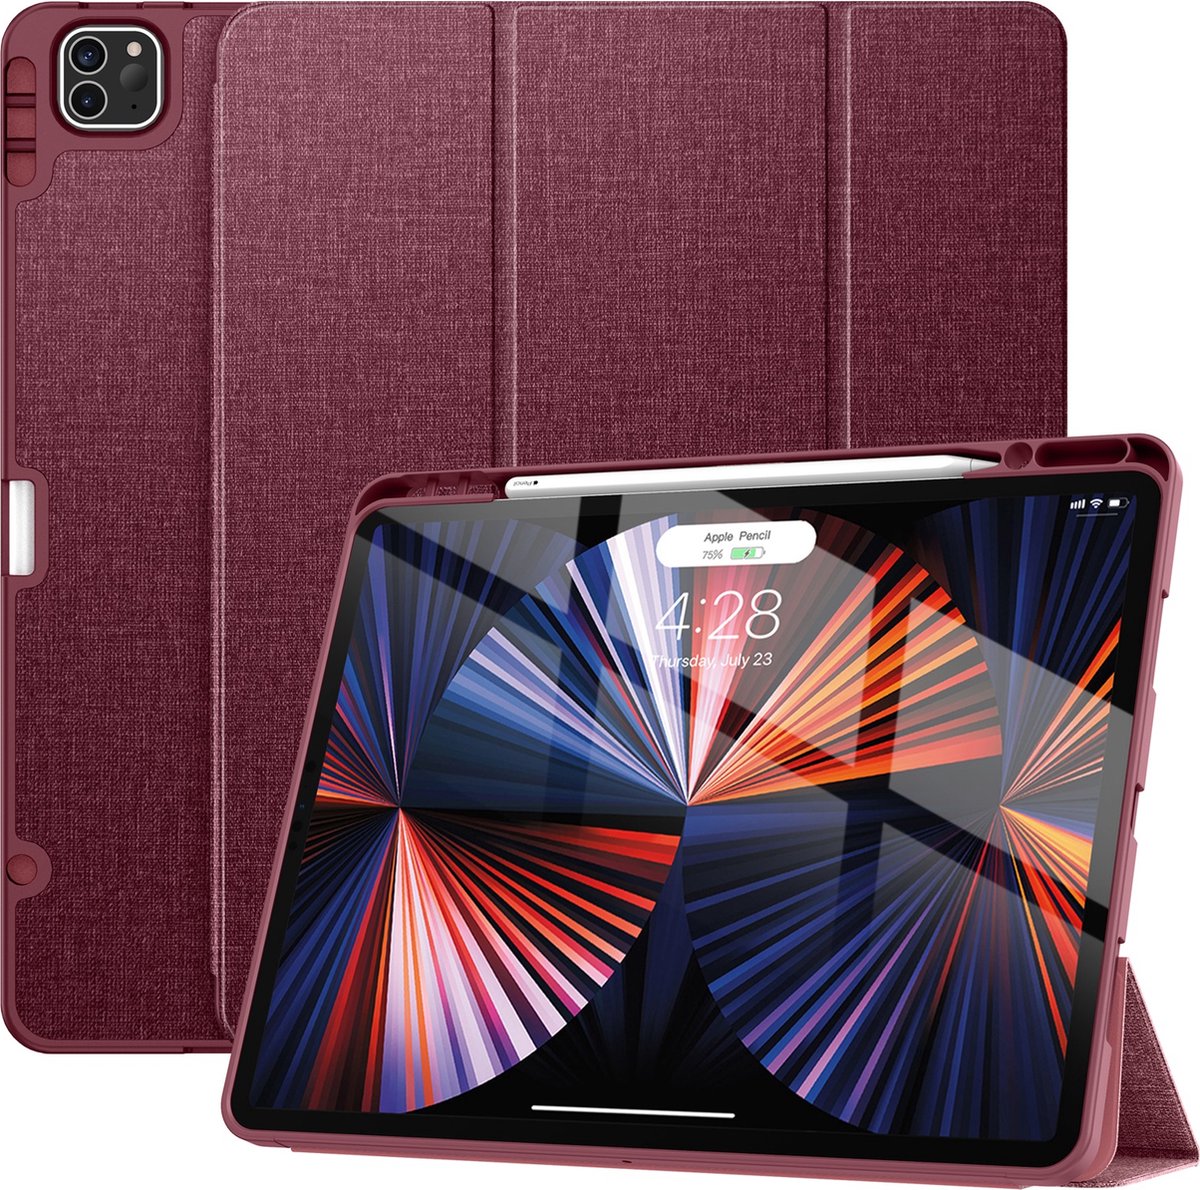 Solidenz TriFold Hoes iPad Pro 12.9 inch - Wijn - Rood